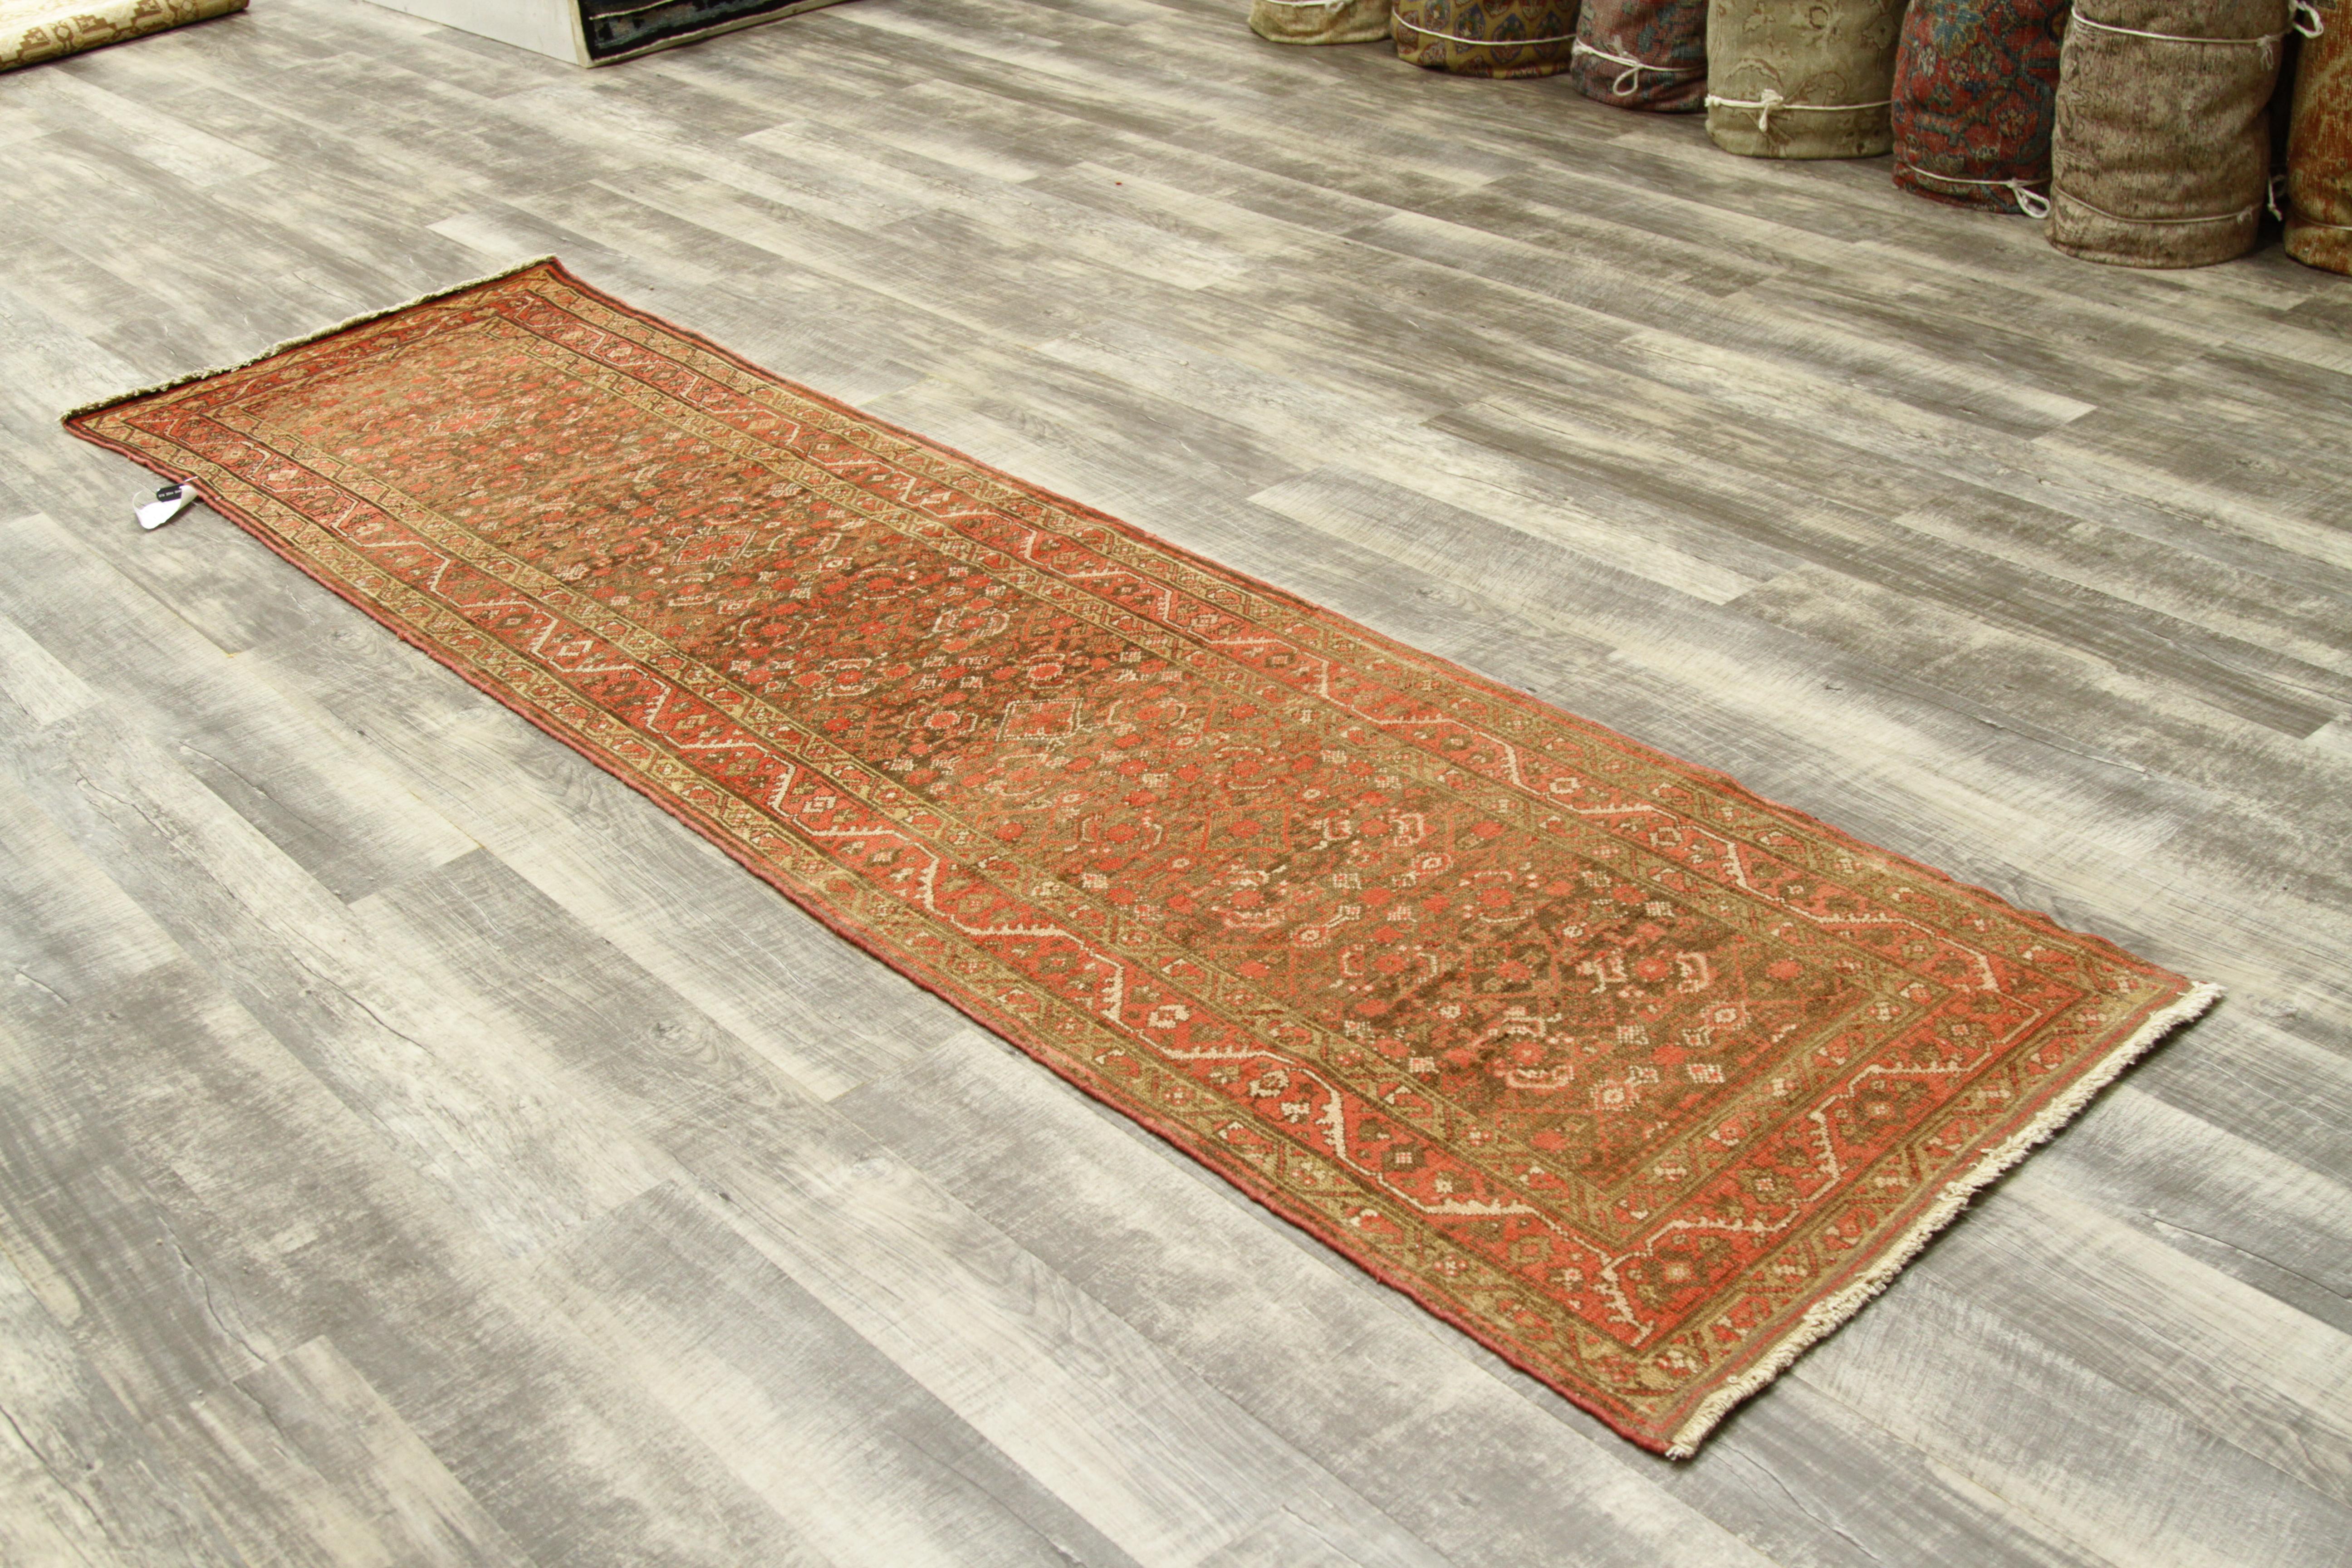 Antique Persian Rug in Malayer Design, 1910 For Sale 13